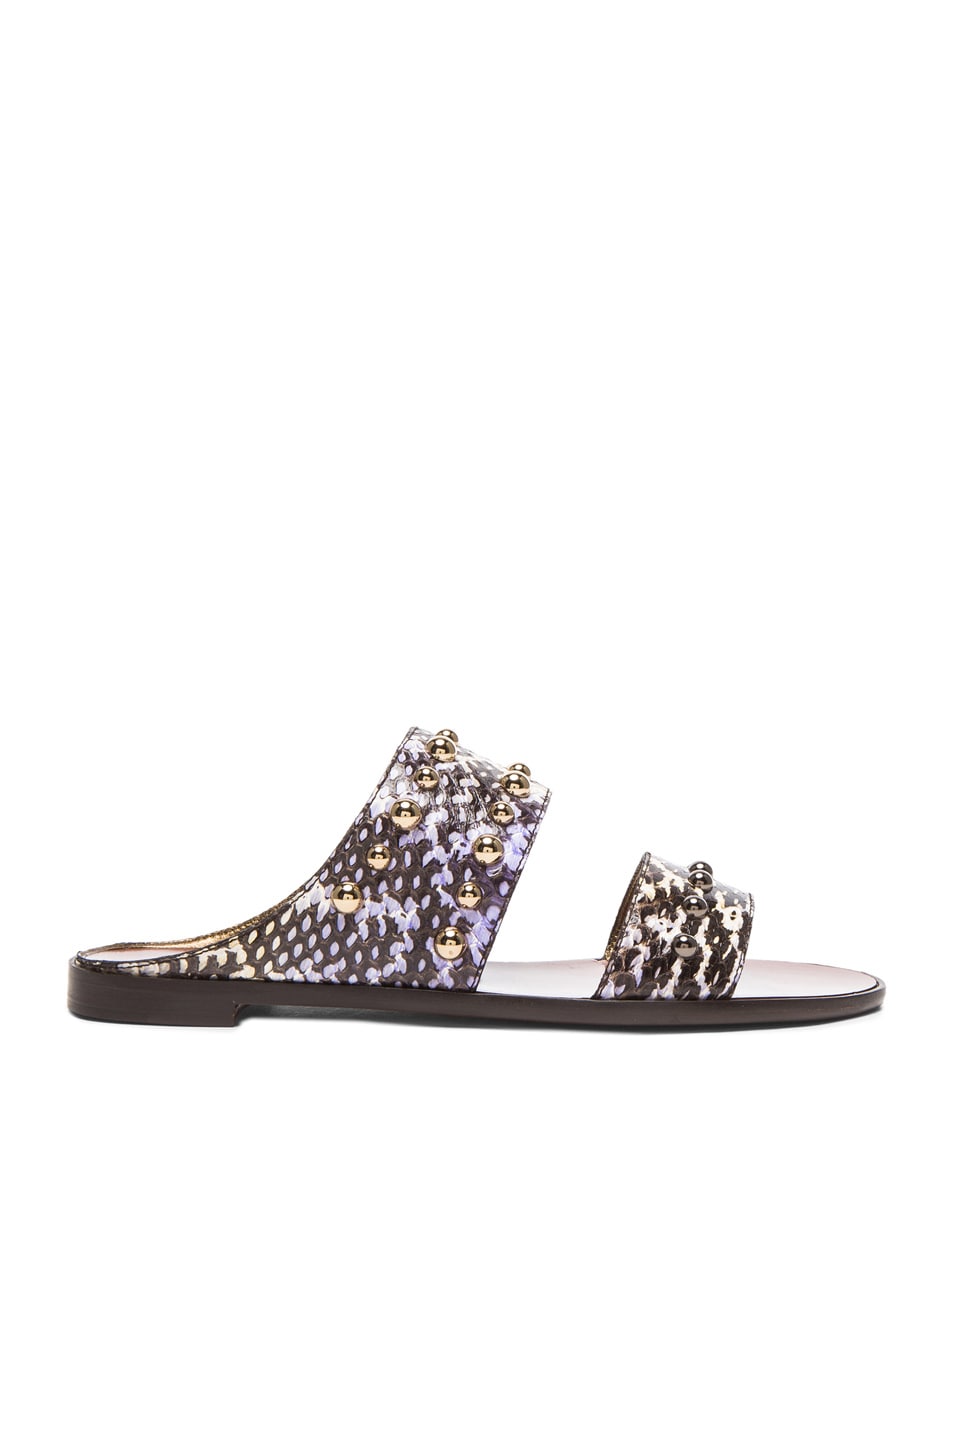 Image 1 of Lanvin Snakeskin Flat Sandals with Studs in Light Blue & Light Yellow